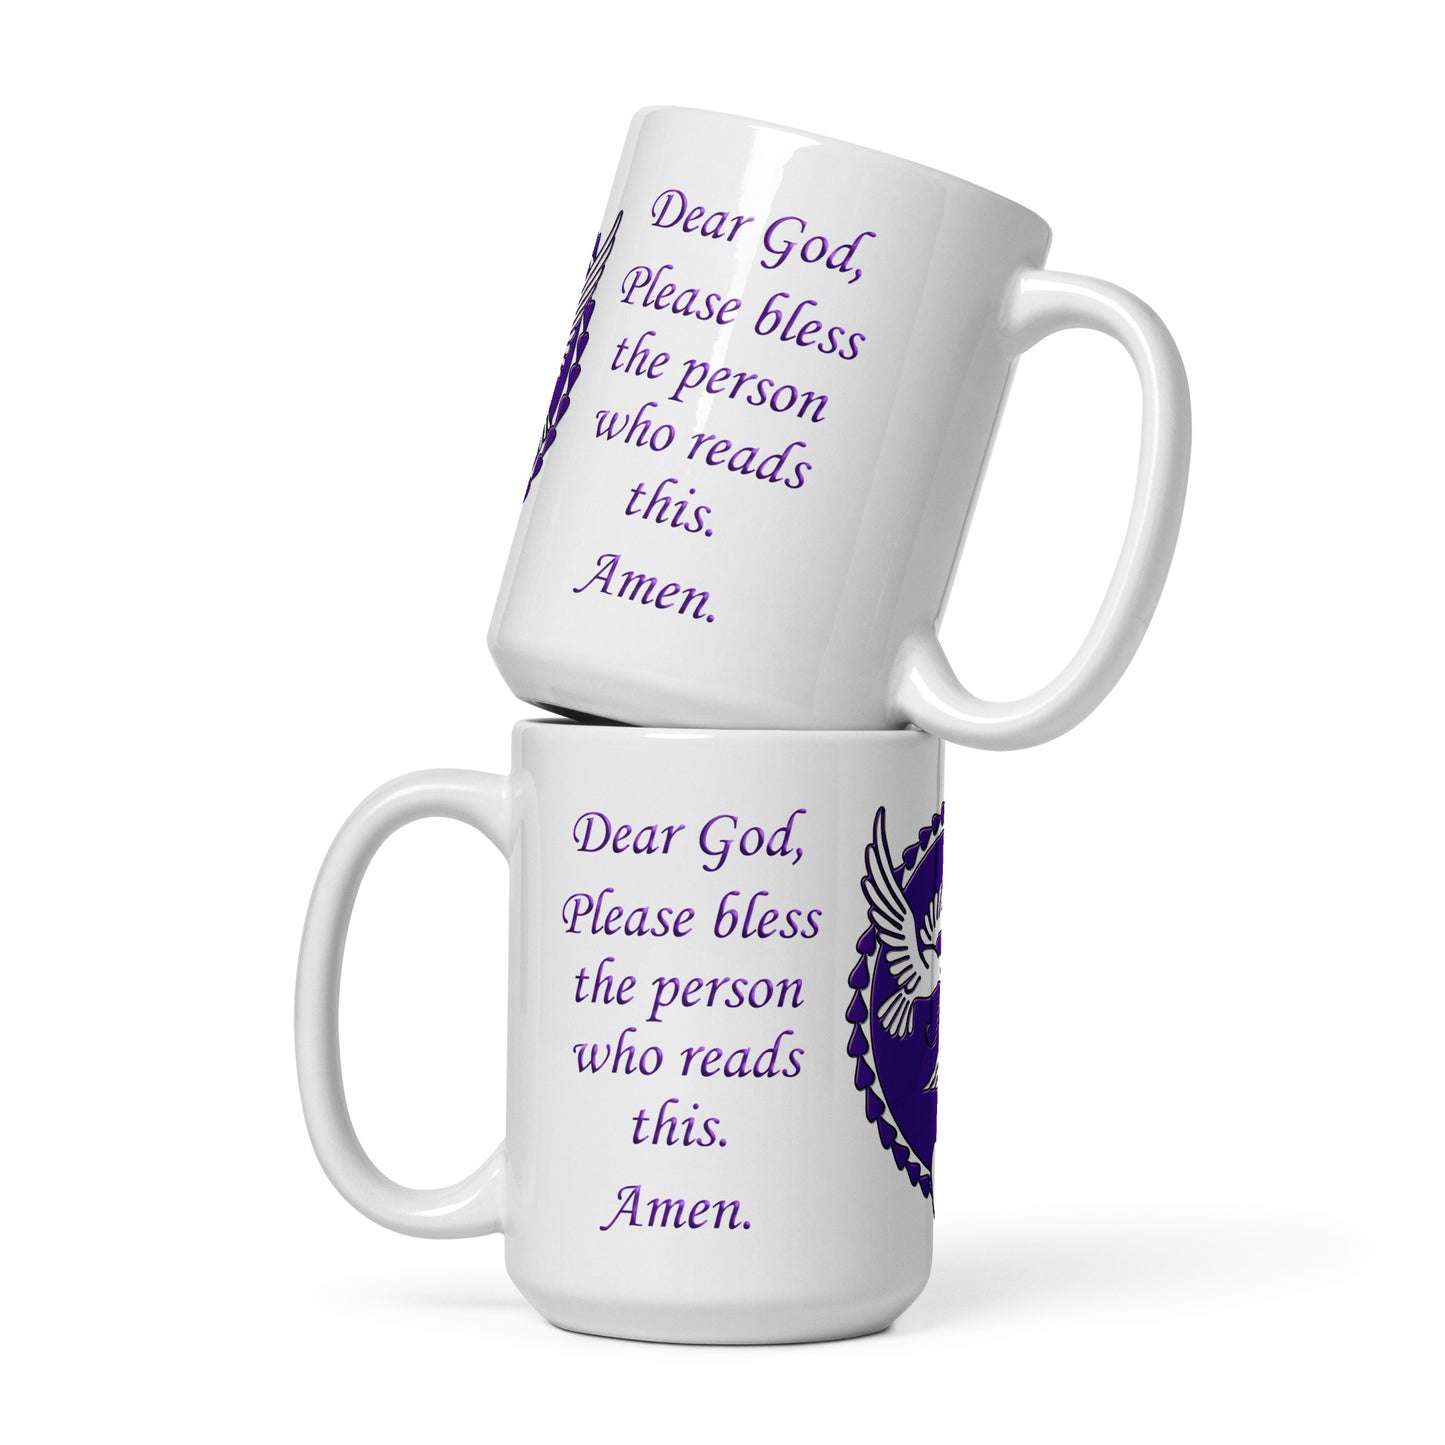 A013 Mug - White Glossy Ceramic Mug Featuring a Graphic of Doves and Hearts with the Text “Dear God, Please Bless the Person Who Reads This, Amen.”